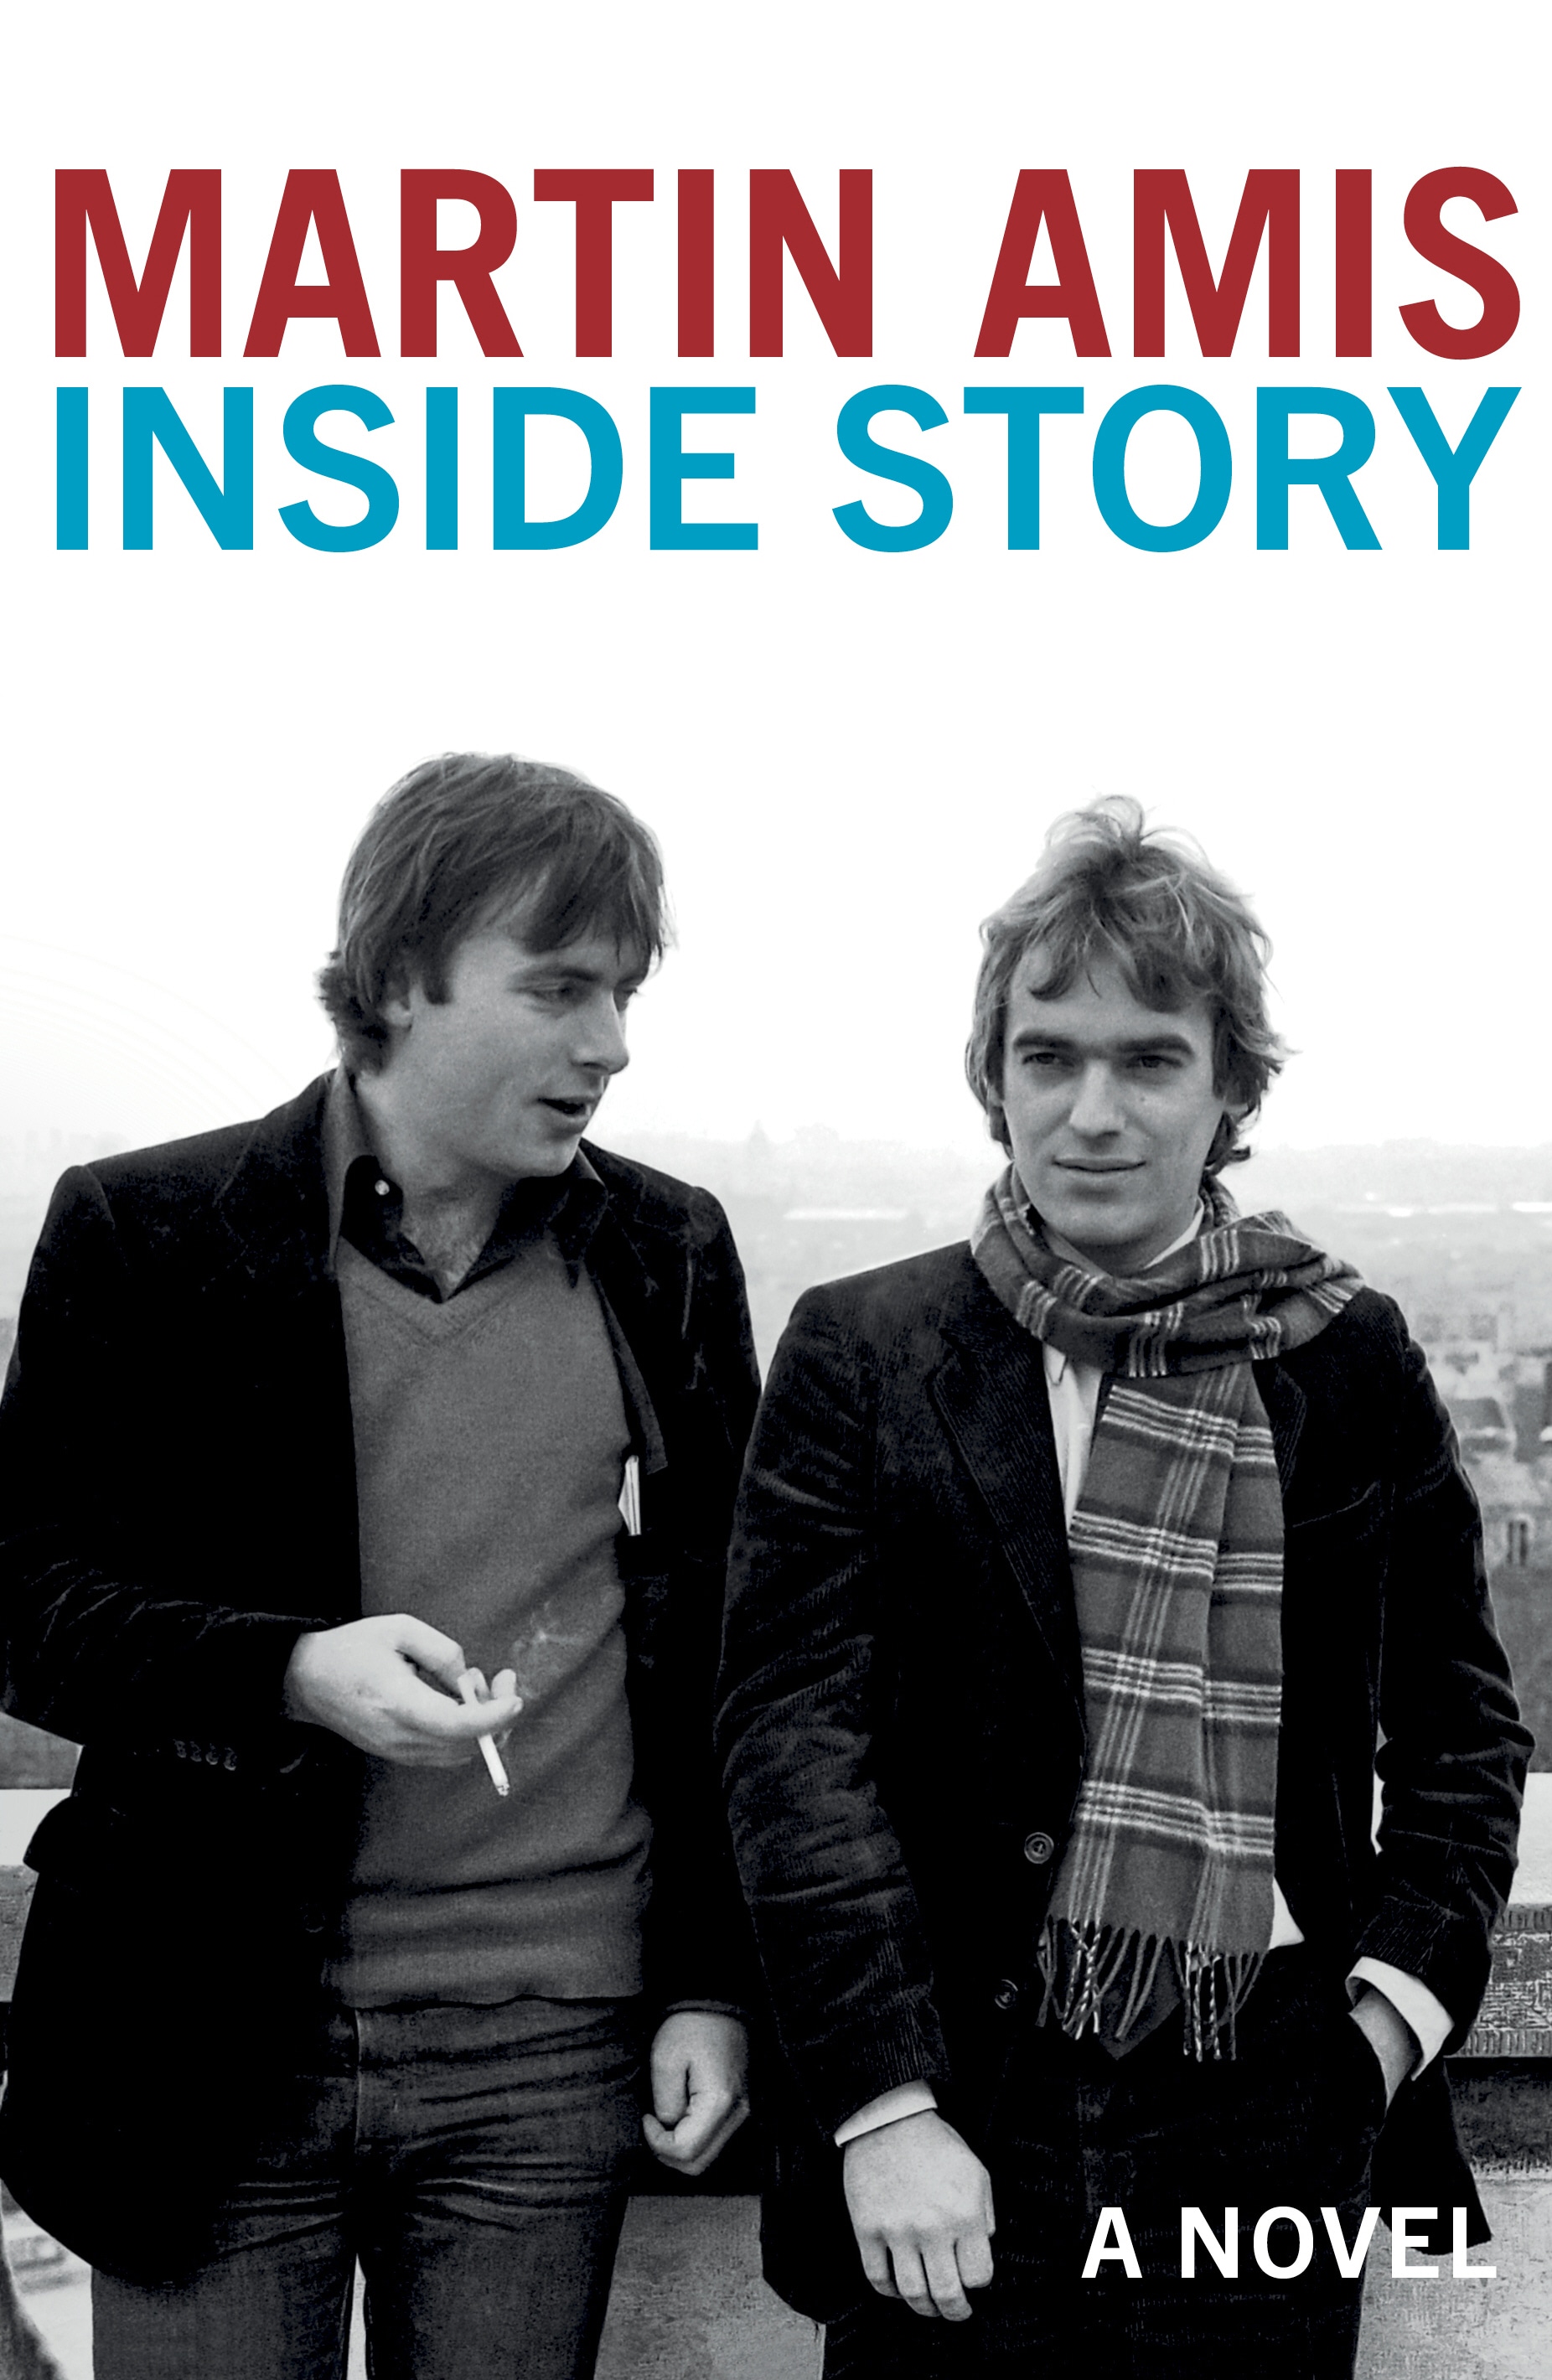 Book “Inside Story” by Martin Amis — September 24, 2020